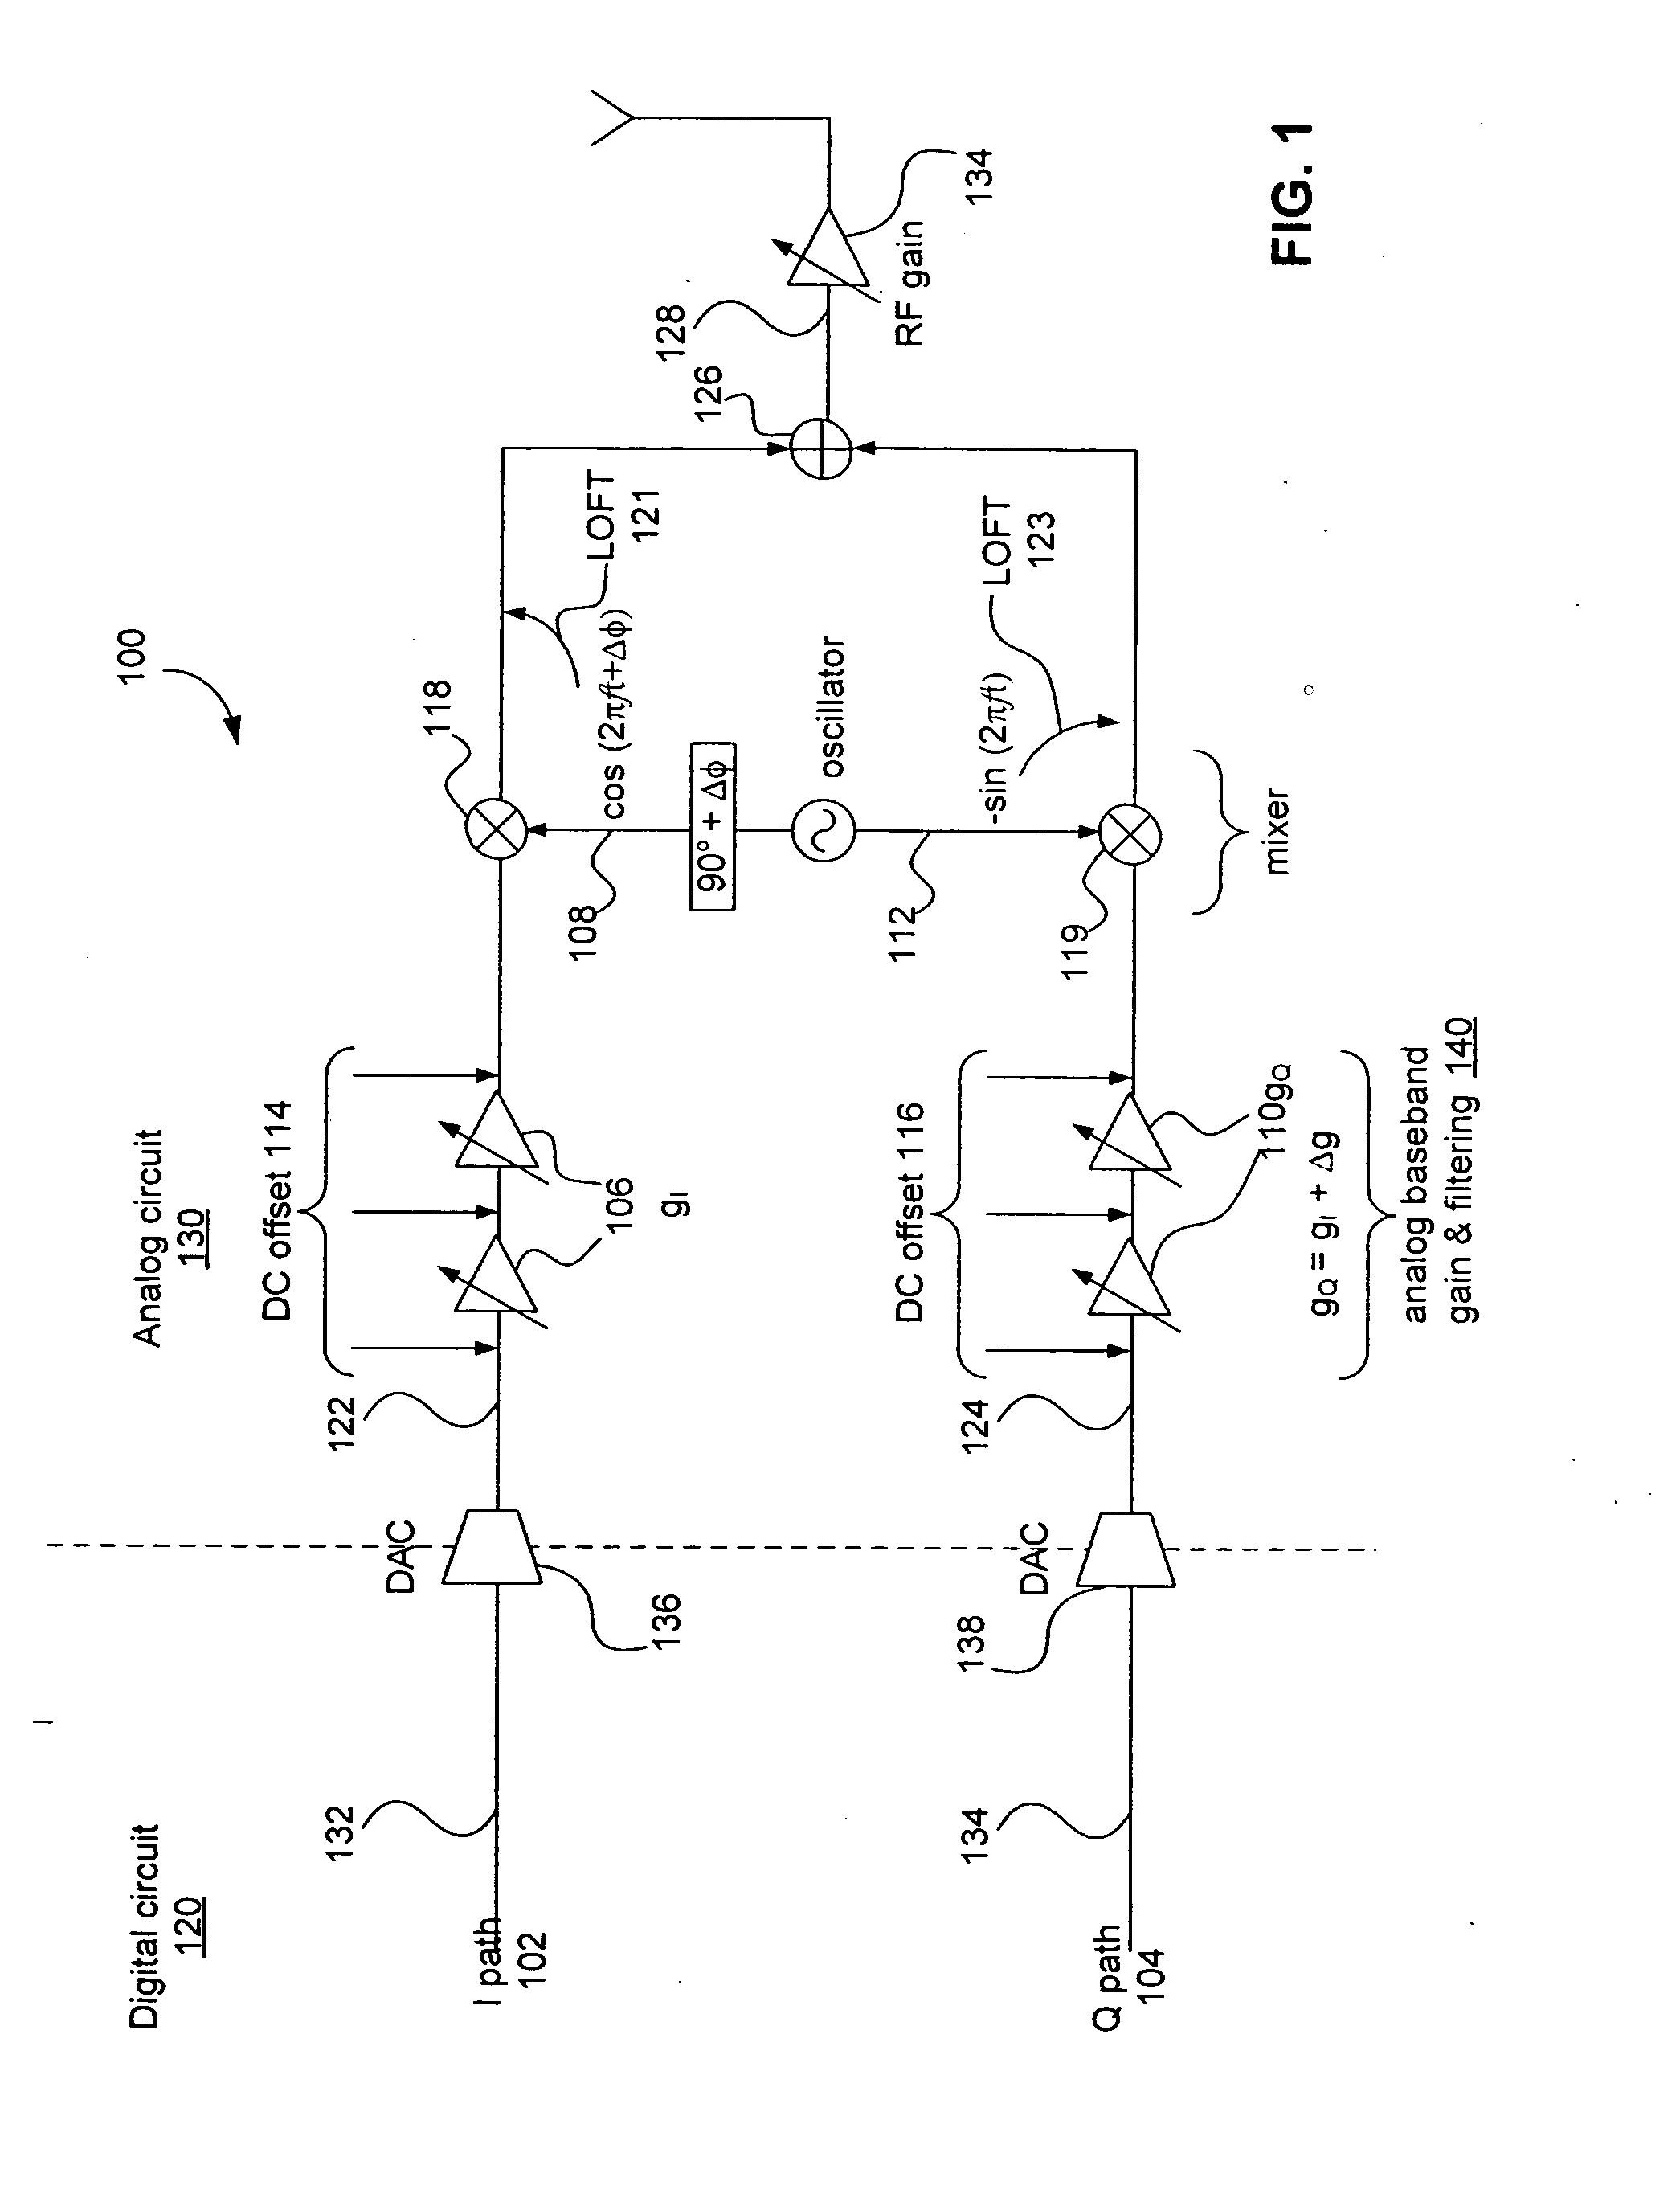 Methods and systems for calibrating for gain and phase imbalance and local oscillator feed-through